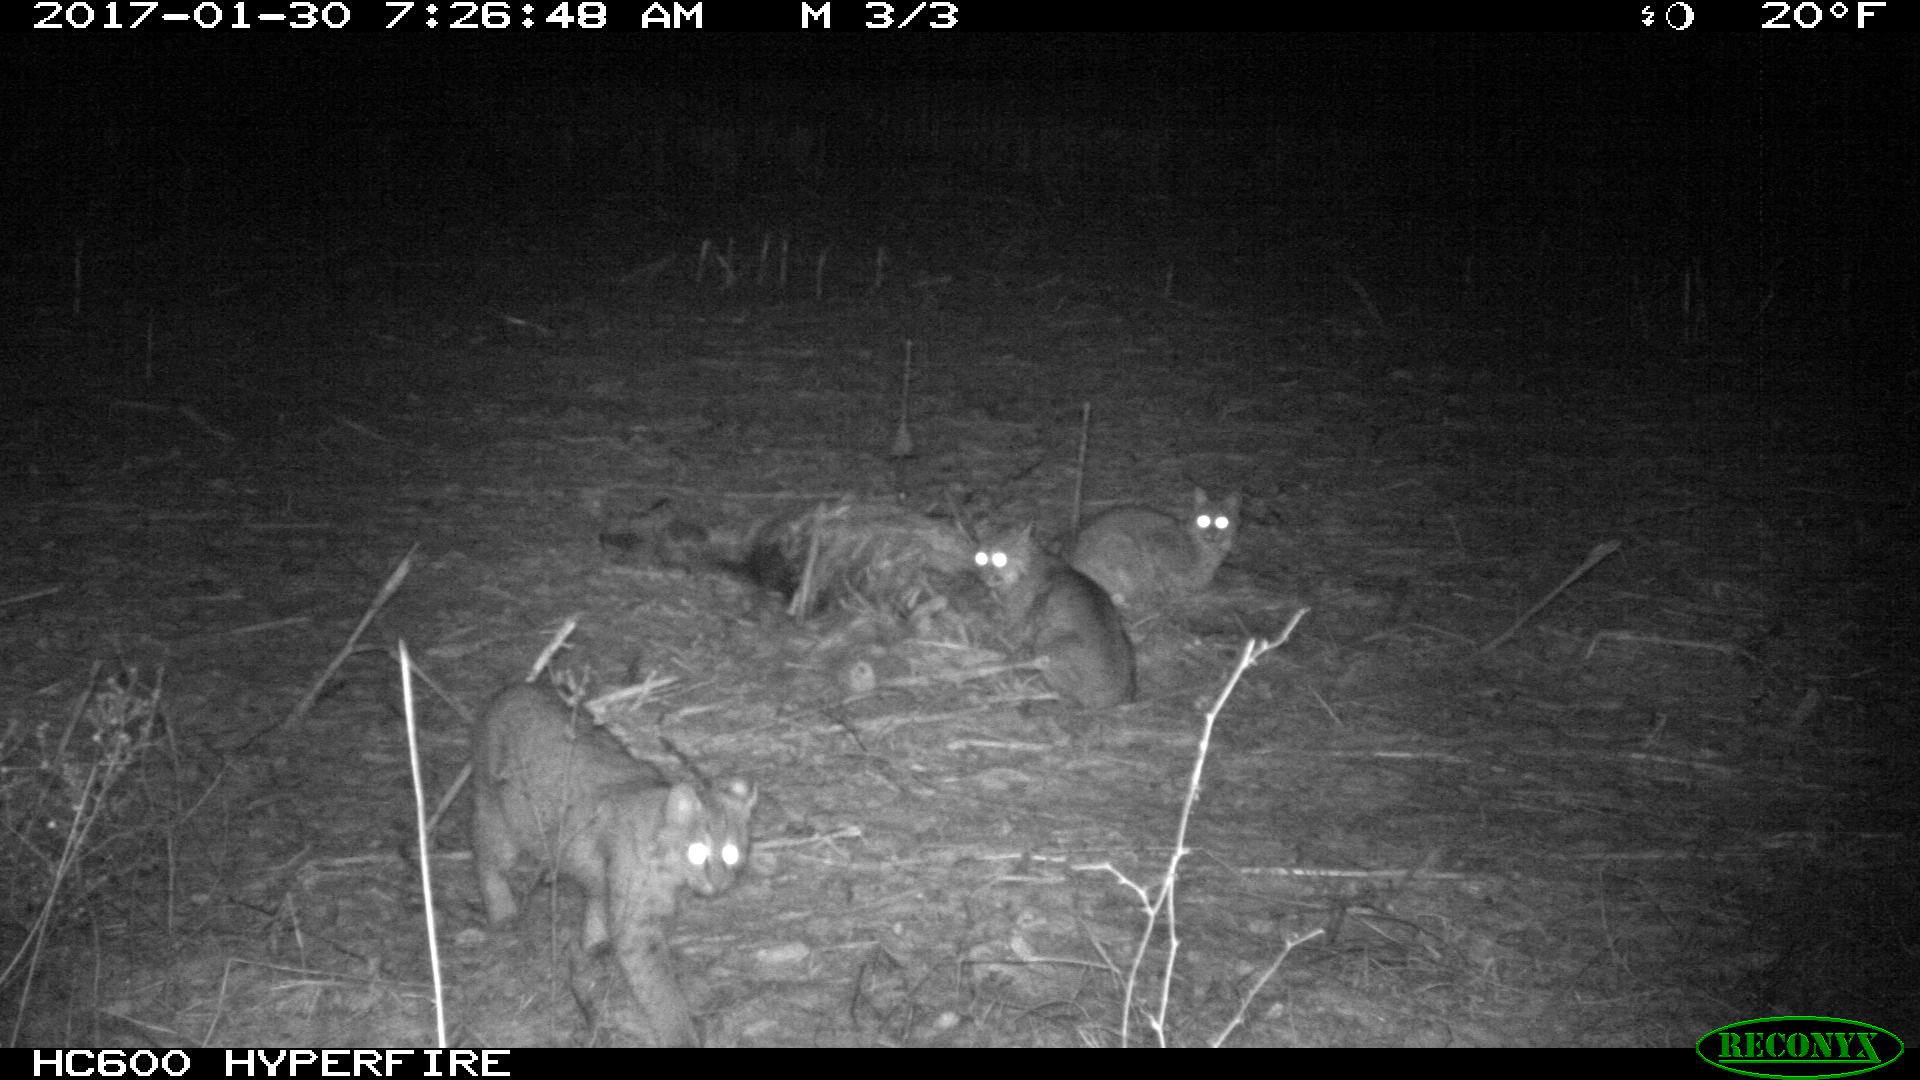 Cougars caught on night camera, Southeastern Indiana Purdue Ag Center​